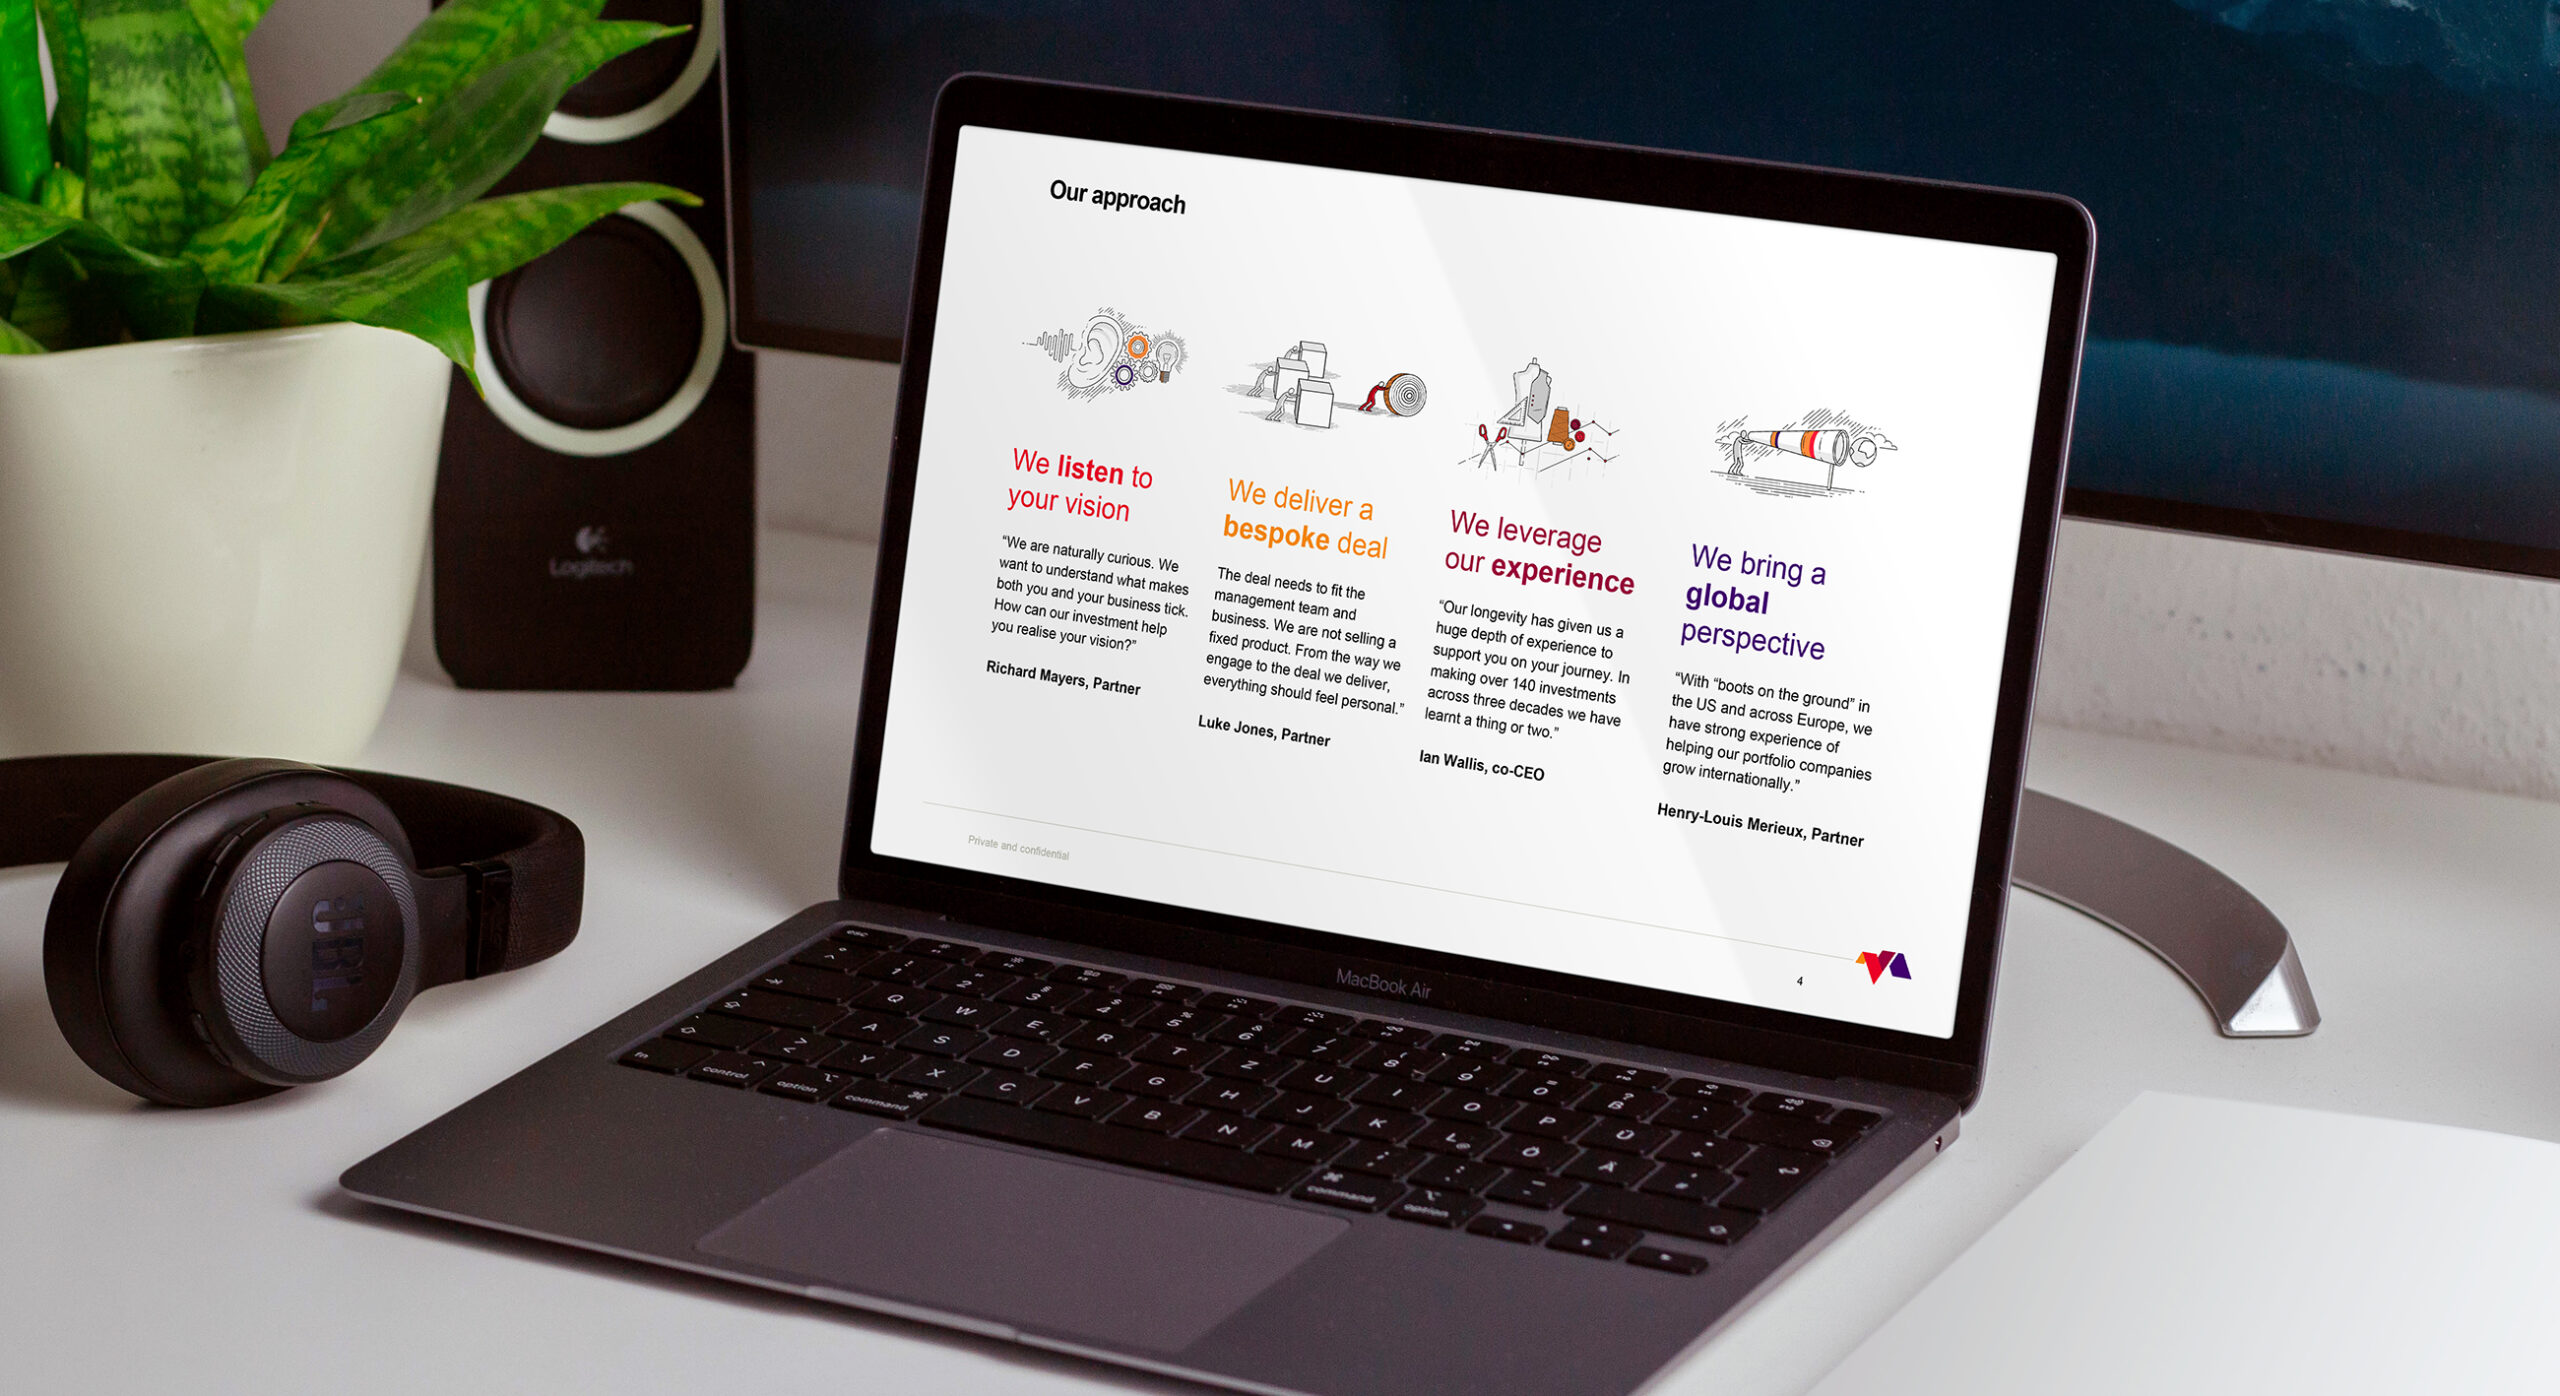 The PowerPoint templates cover both brand storytelling as well as functional infographics design.